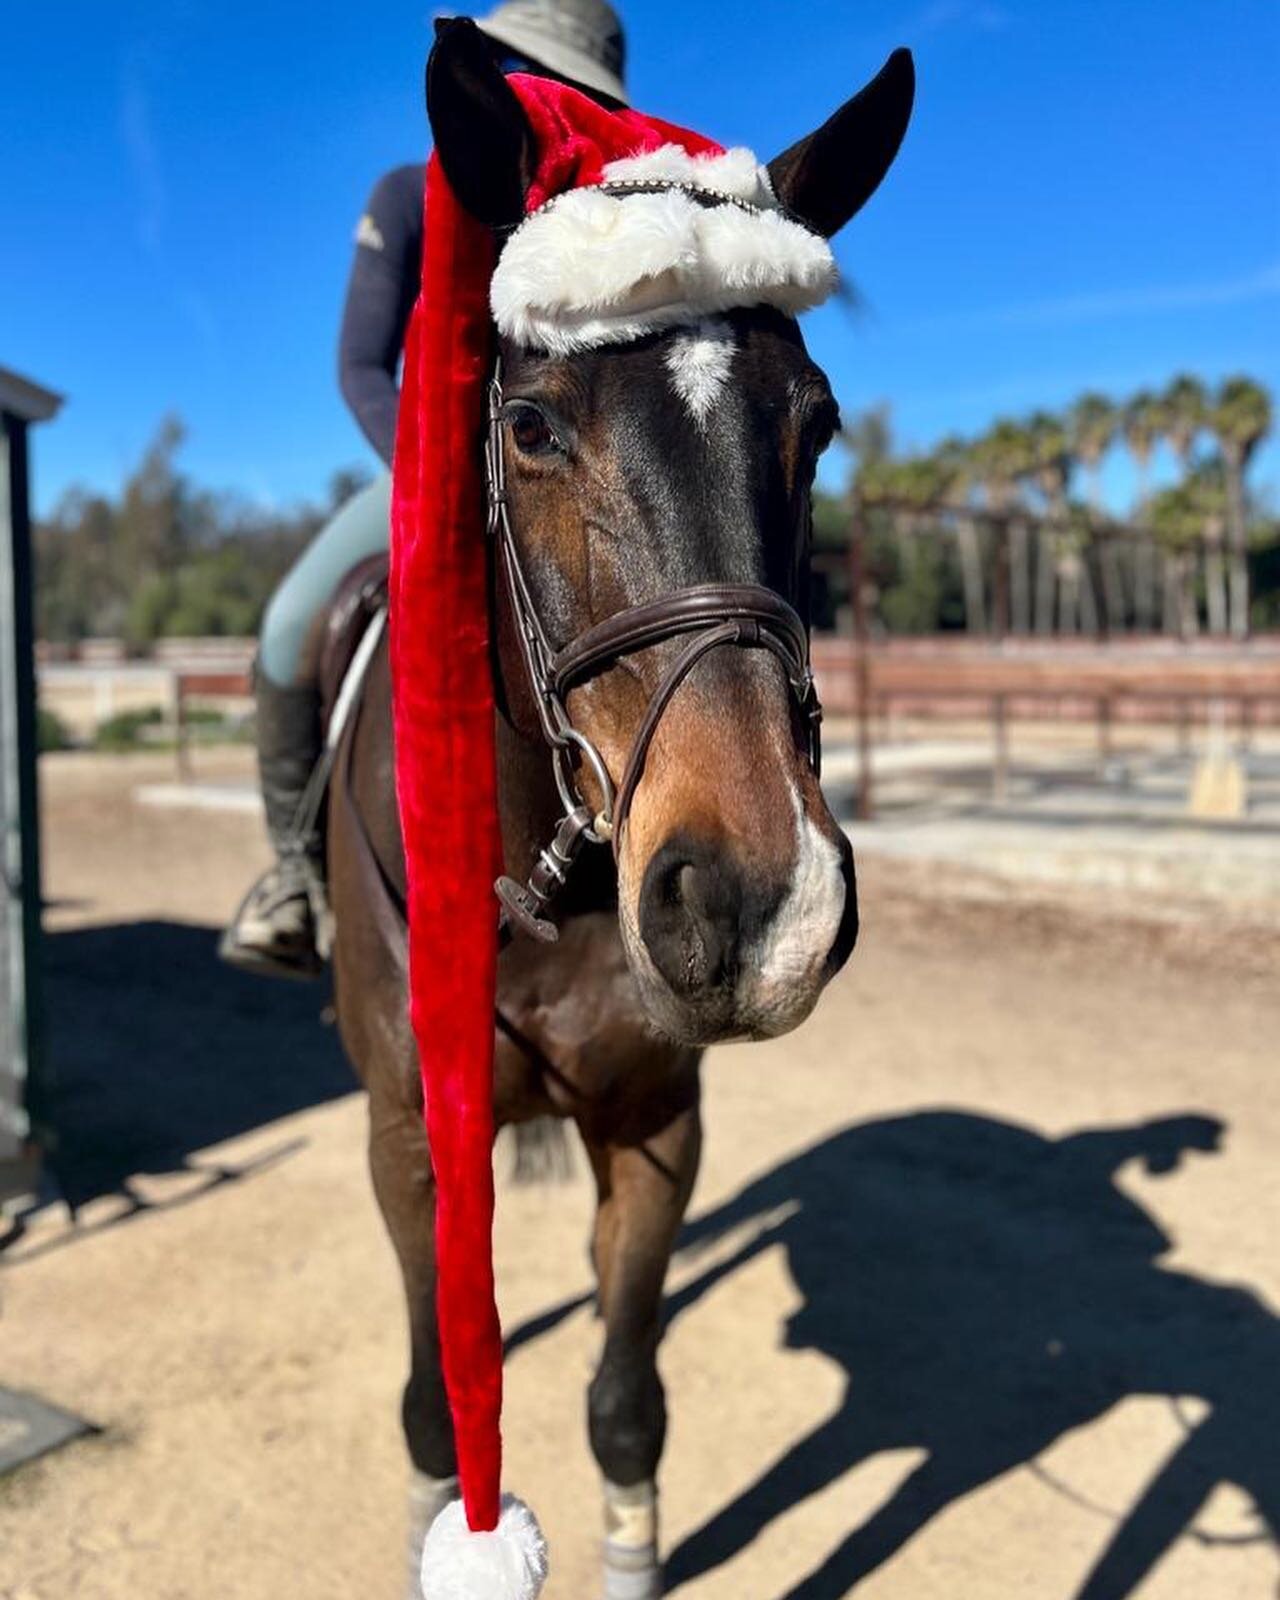 Our horses are ready for Christmas! 🎅